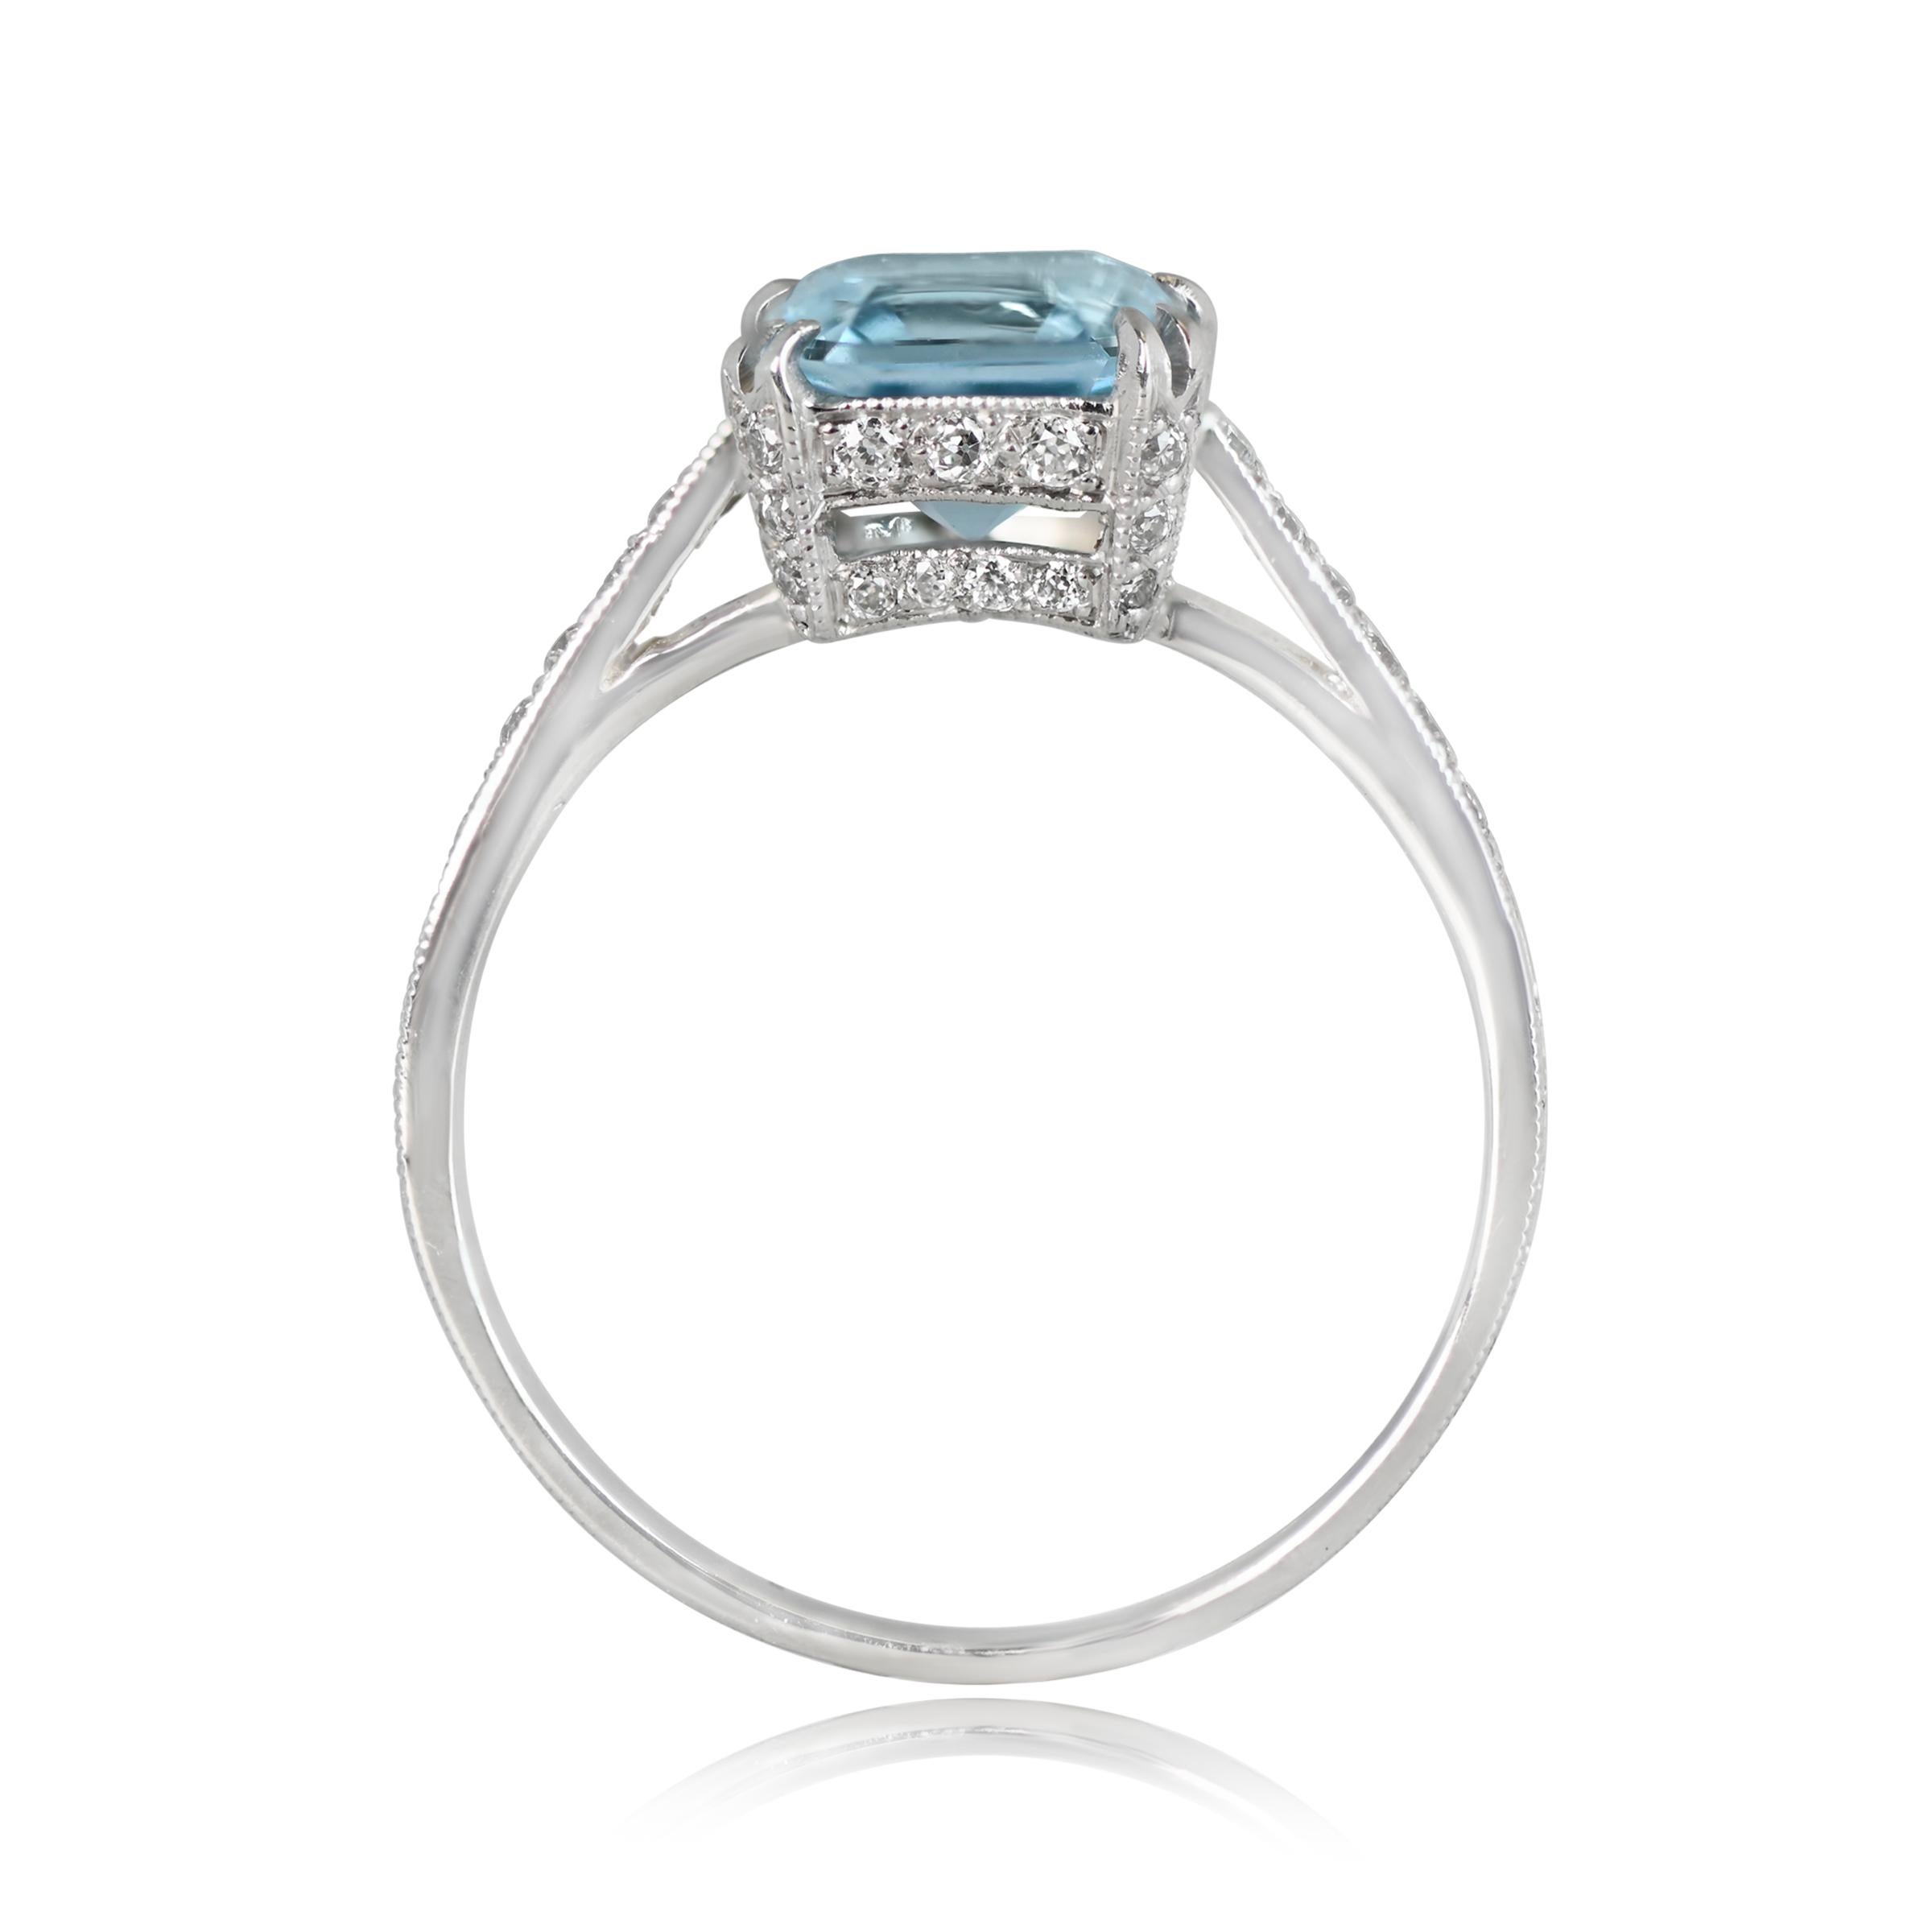 1.39ct Asscher Cut Aquamarine Engagement Ring, Platinum  In Excellent Condition For Sale In New York, NY